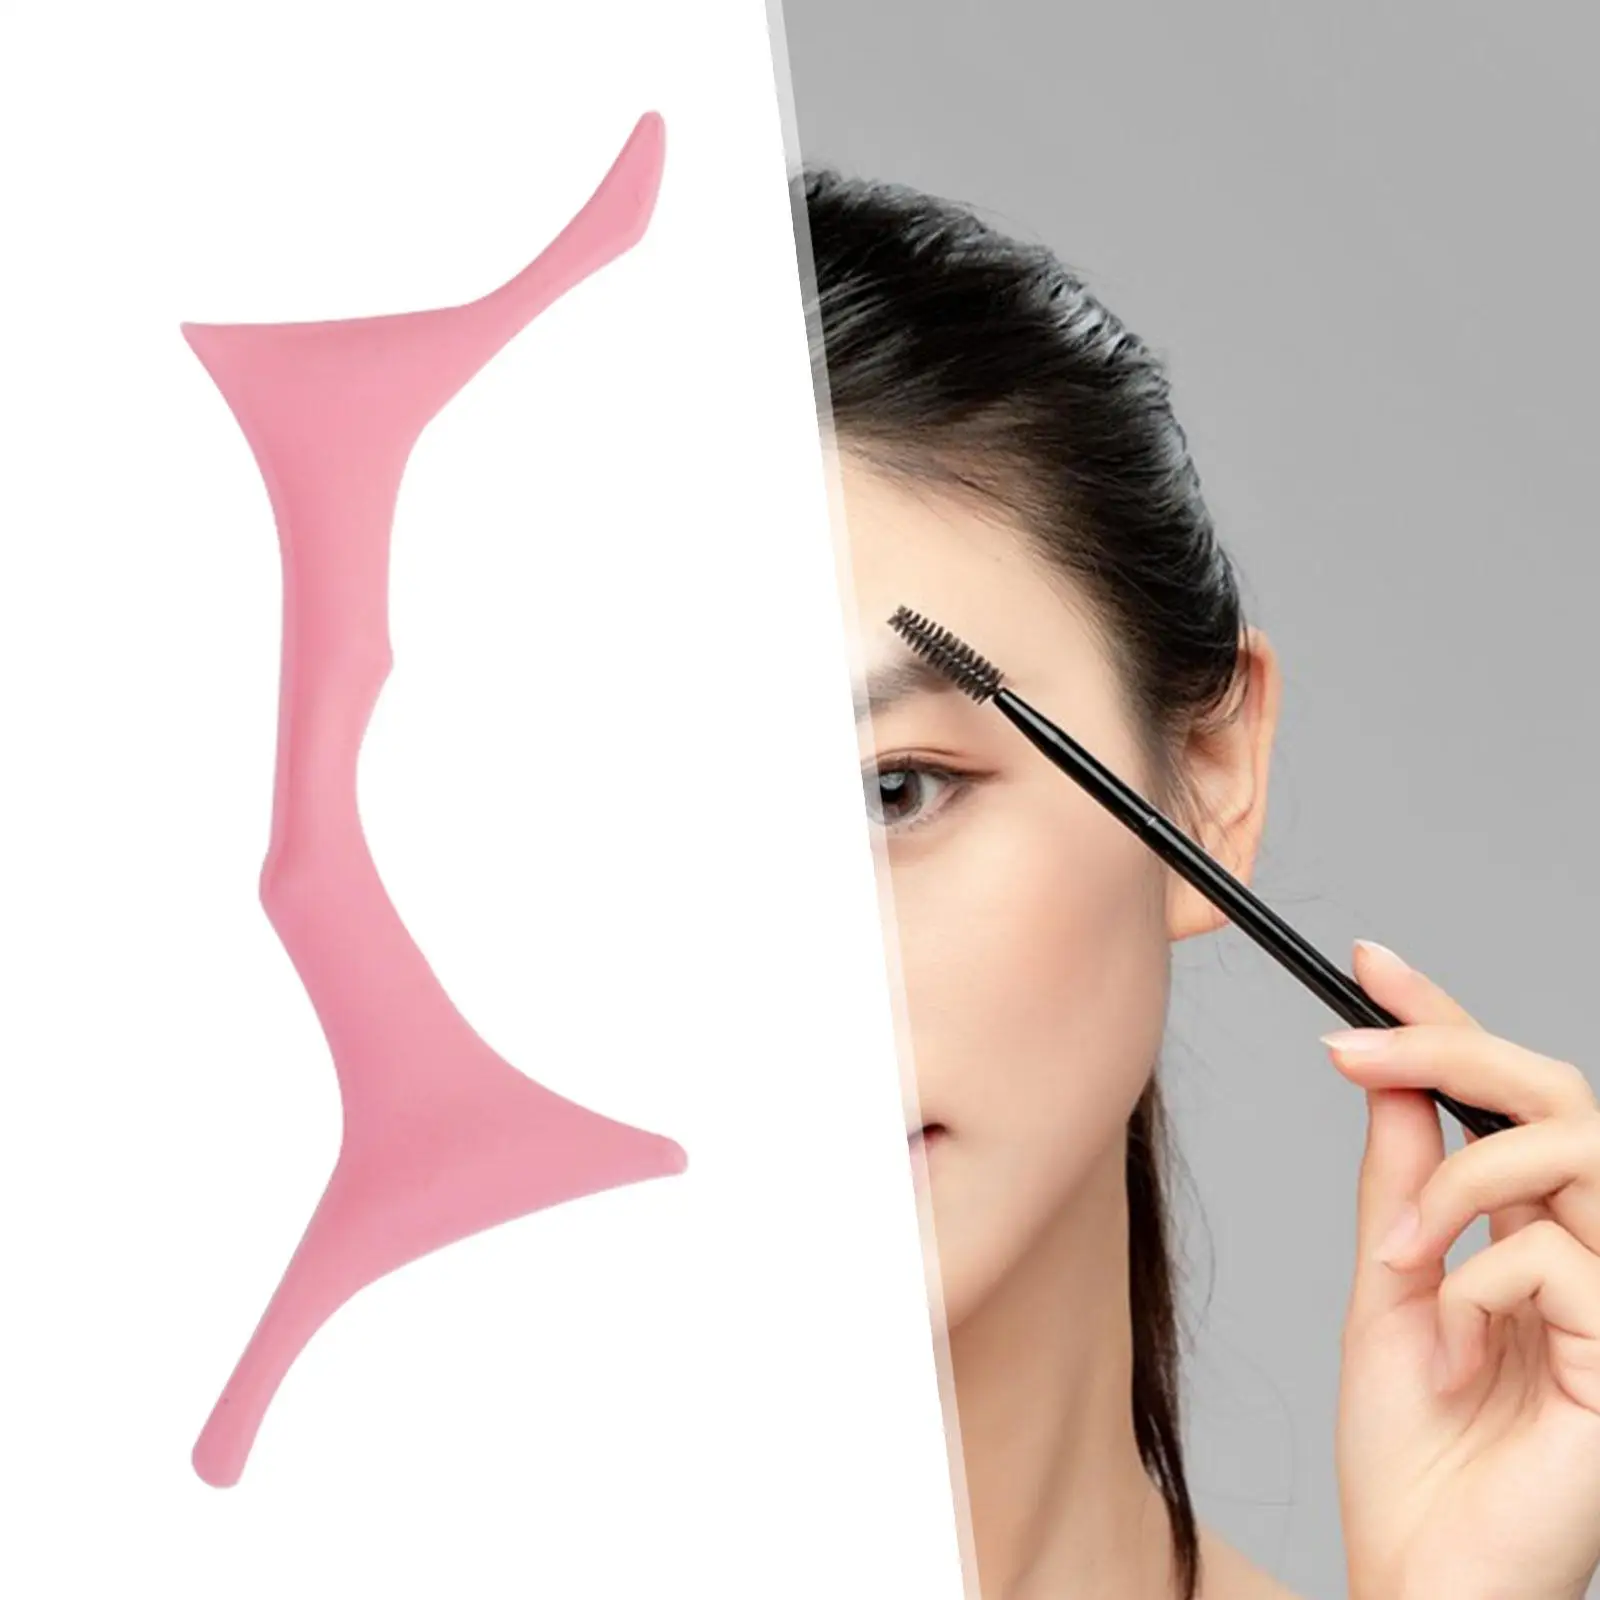 Silicone Eyeshadow Stencil Eyeliner Aid Tool Soft and Durable Comfortable to Hold Reusable Multifunctional for Hooded Eyes